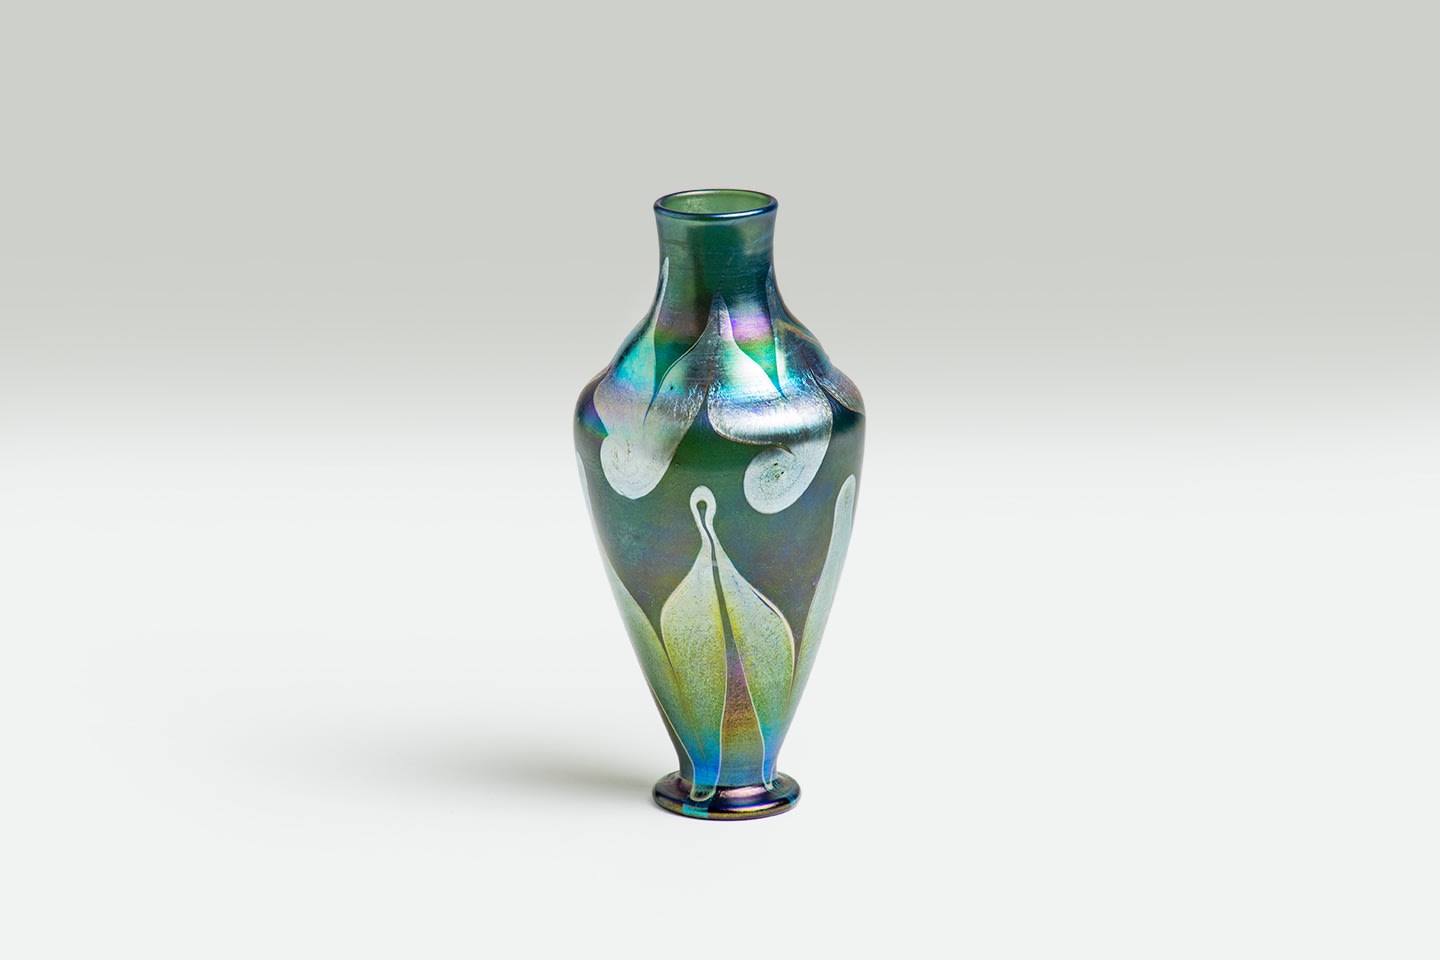 Early Decorated Favrile Glass Vase